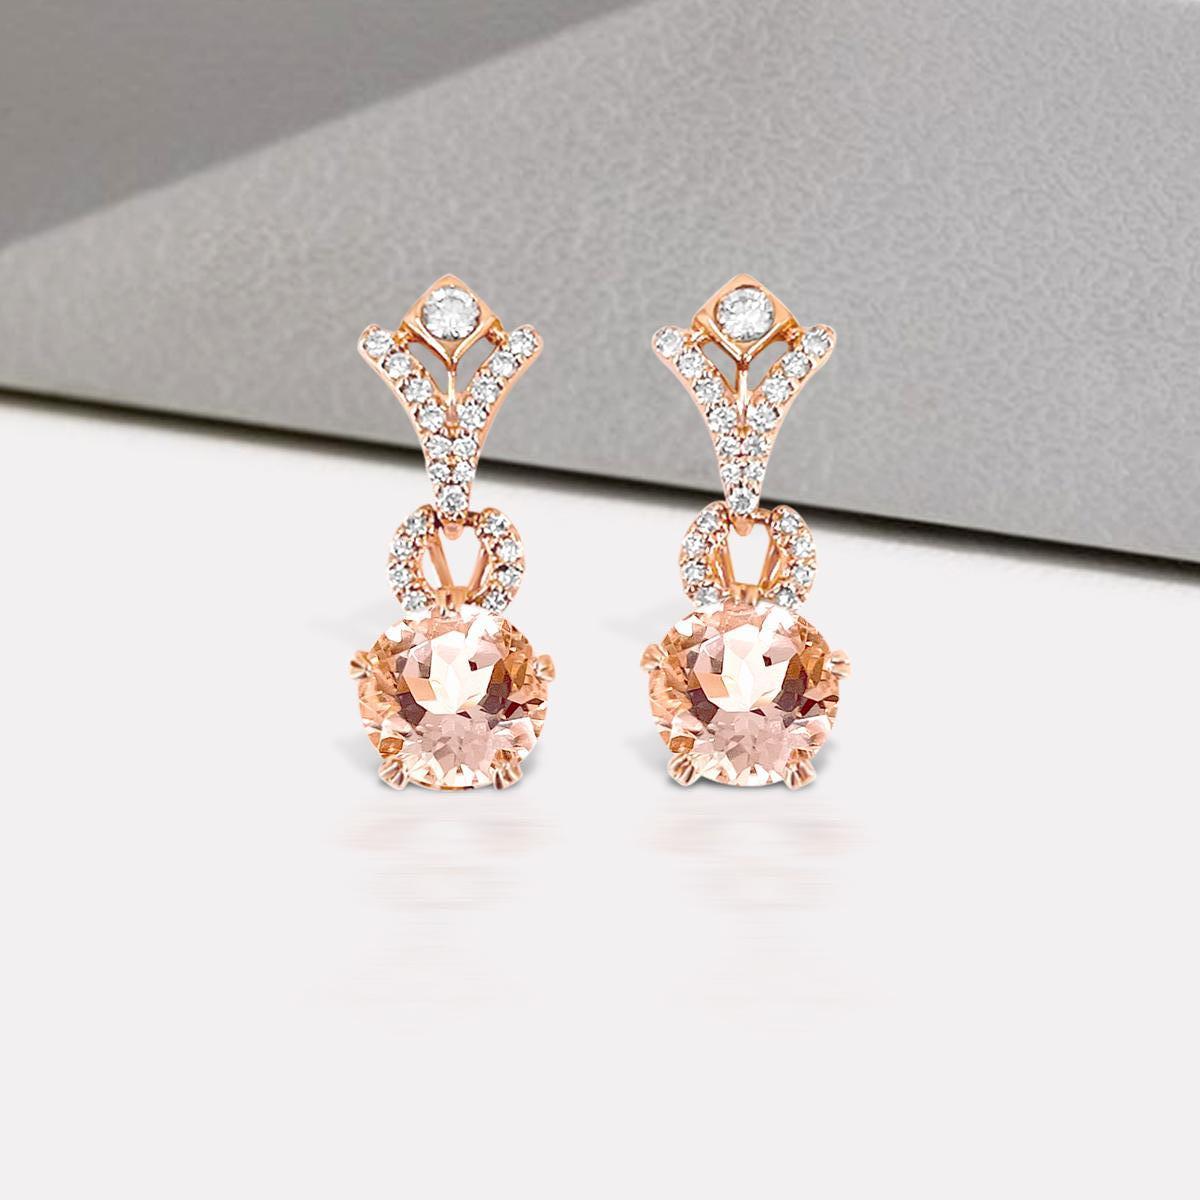 These Stylish Earrings Crafted In 14K Rose Gold Features Perfectly Round Shape Ravishing 8mm Morganite With Diamonds And Are A Perfect Accessory To Own. These Morganite Earrings, Captivate With Their Shiny Appeal.


Style# E5207MO
Morganite: Round